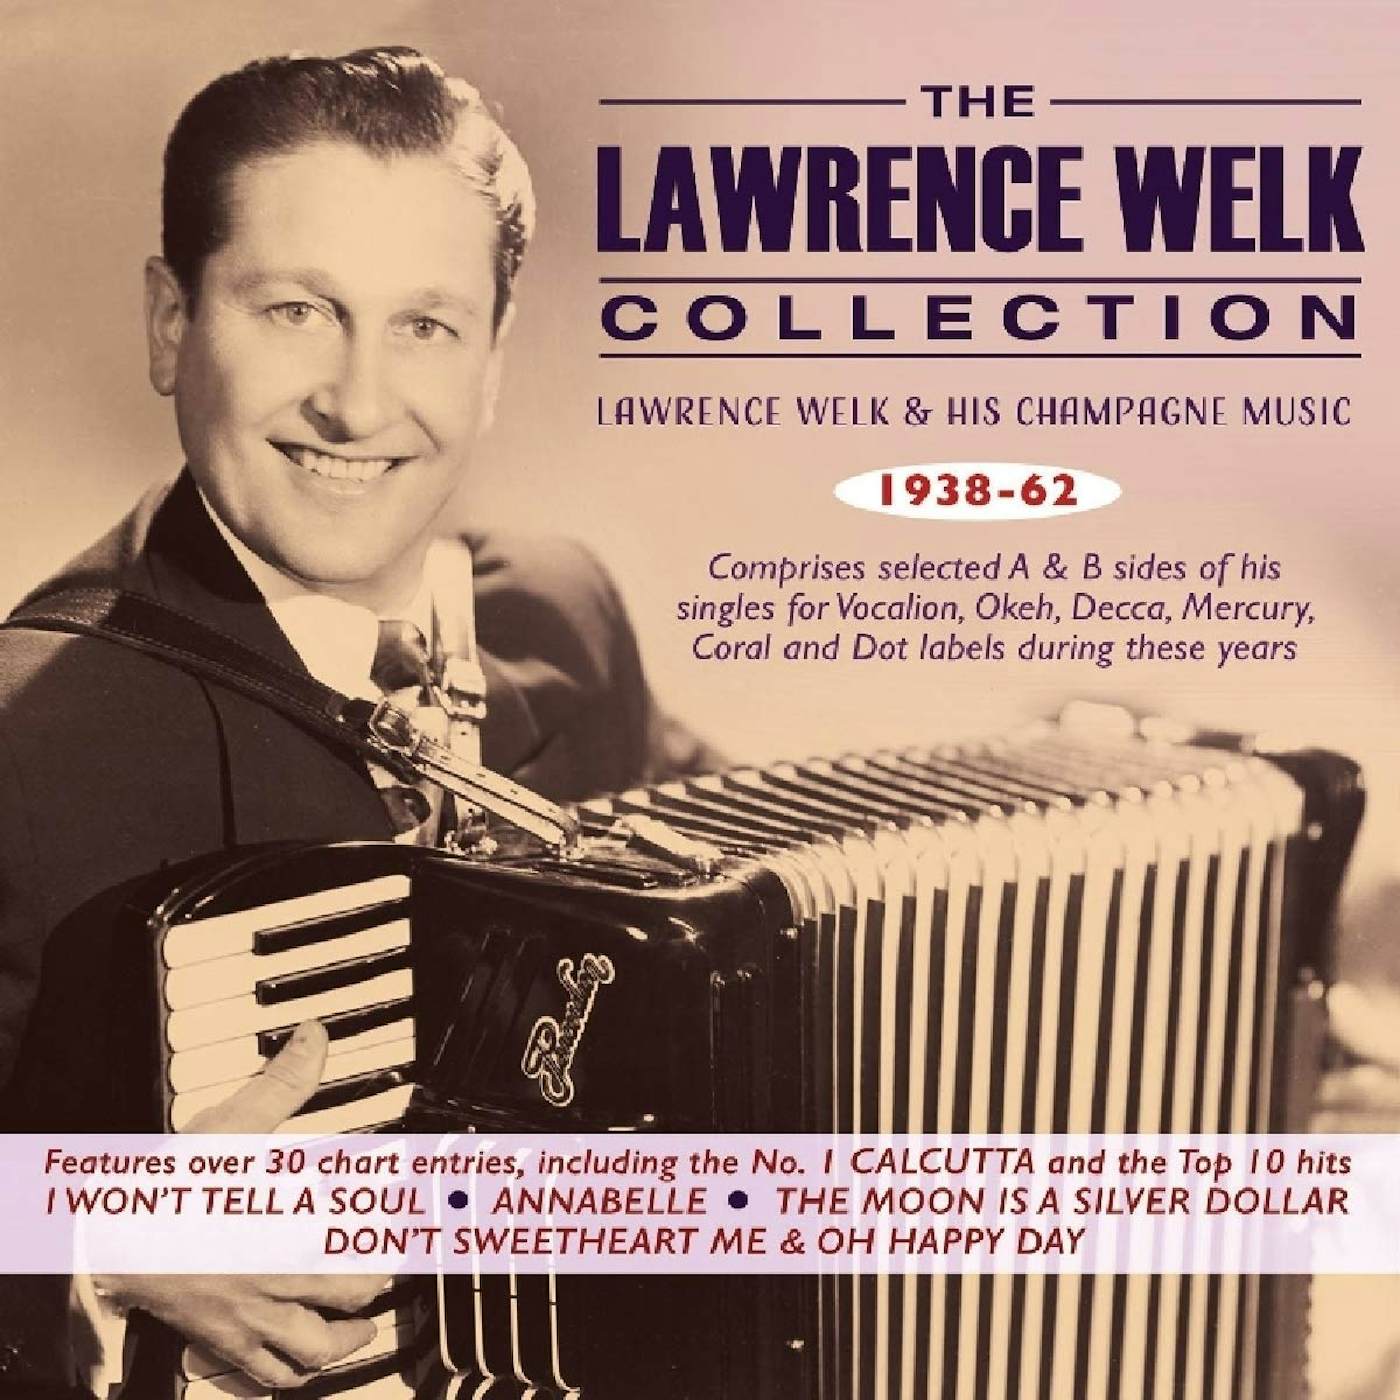 LAWRENCE WELK COLLECTION: LAWRENCE WELK & HIS CD